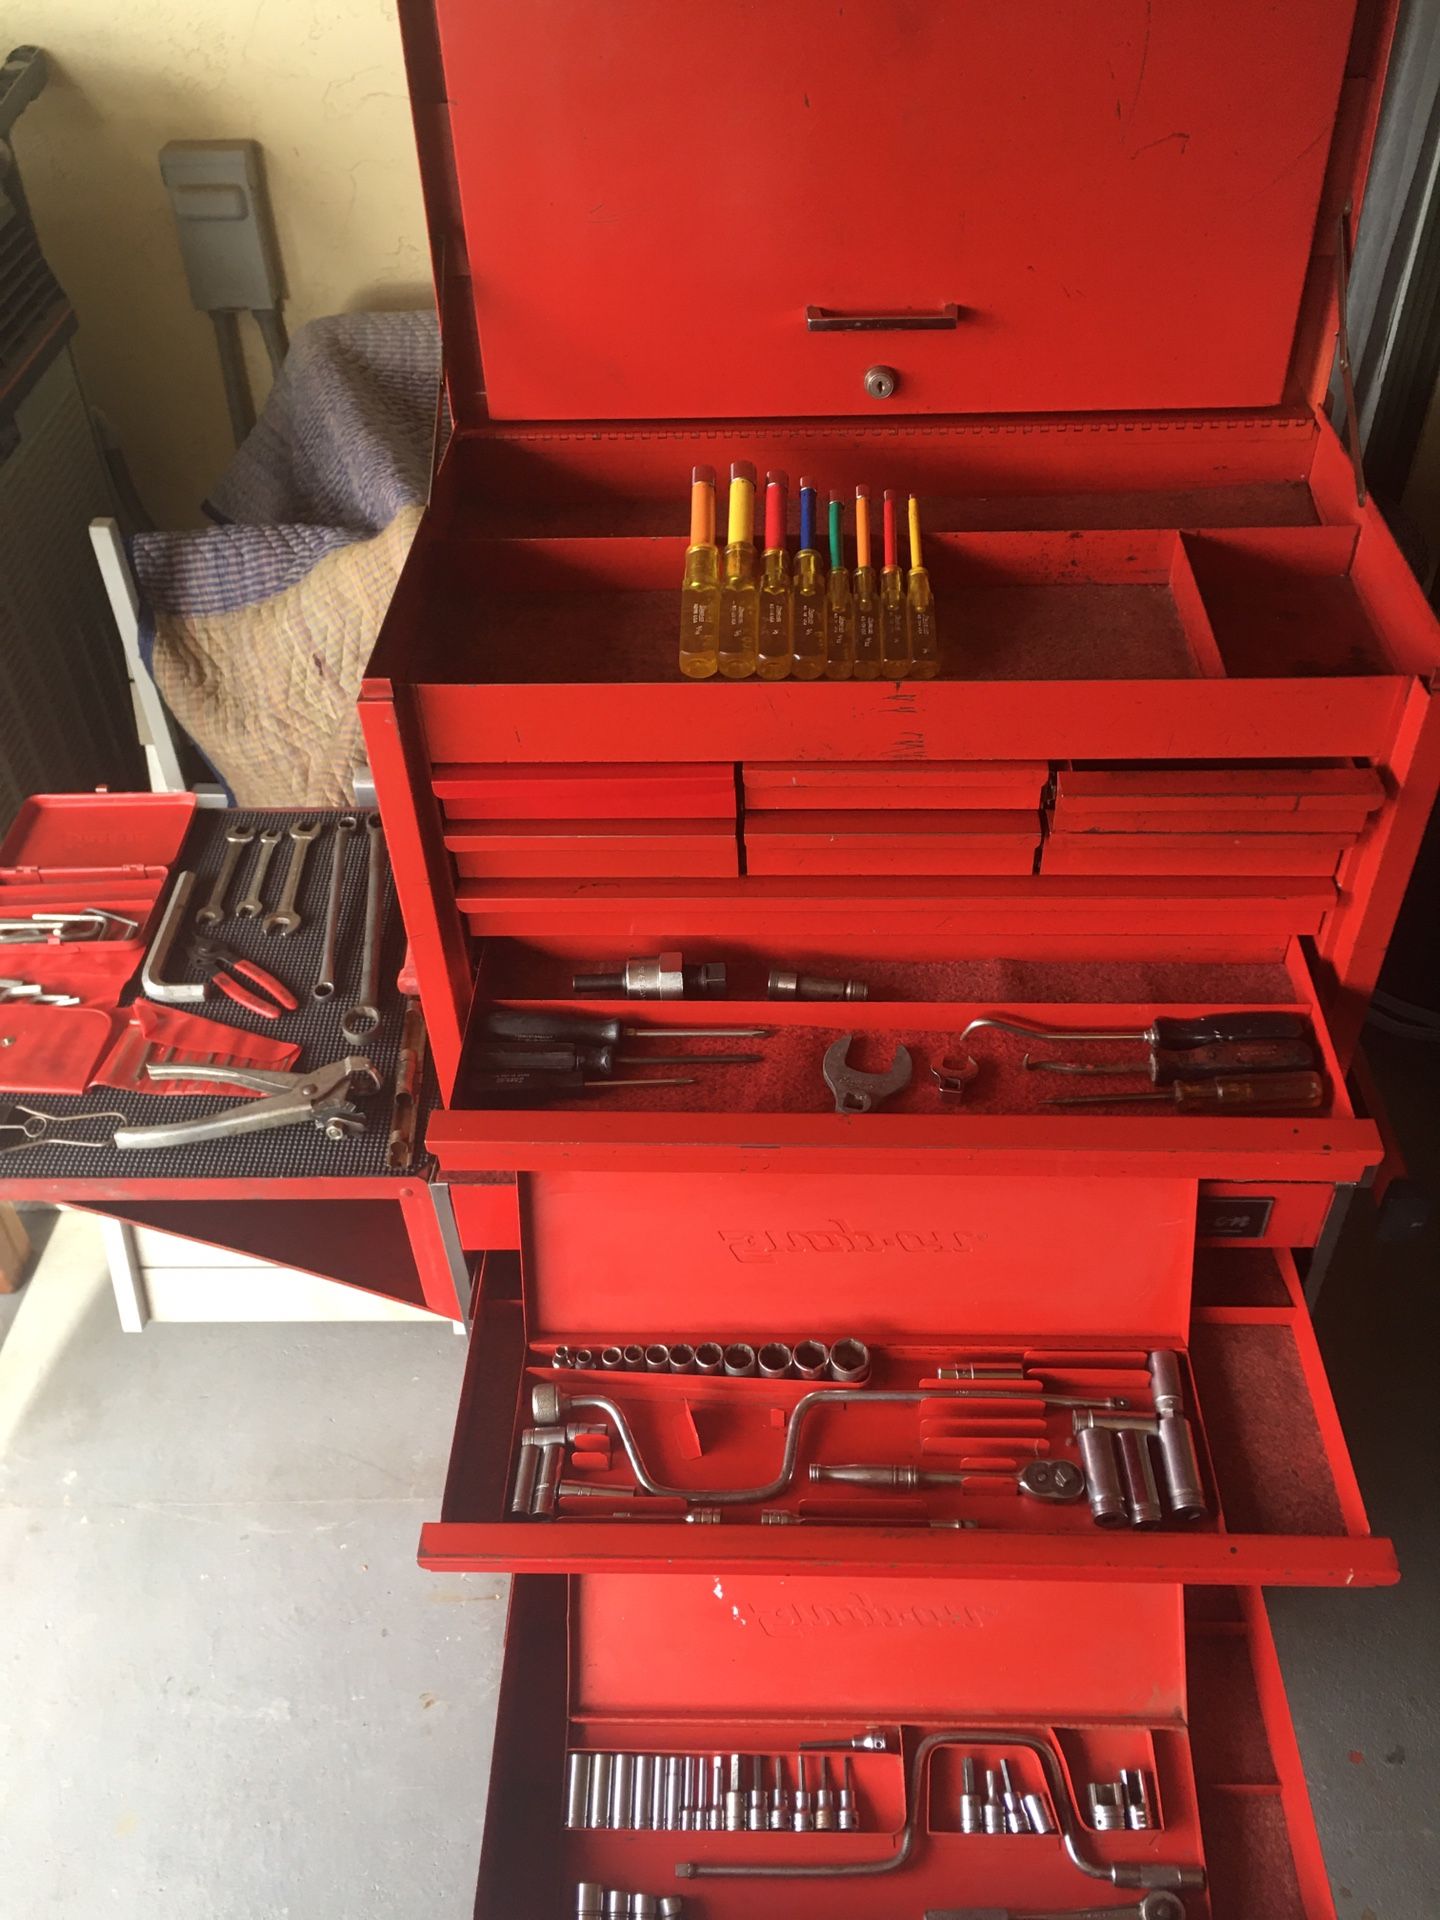 Vintage Snap-On KRA-59c KRA-412A & KR-558c Combo Rolling Tool Chest (1970’s)